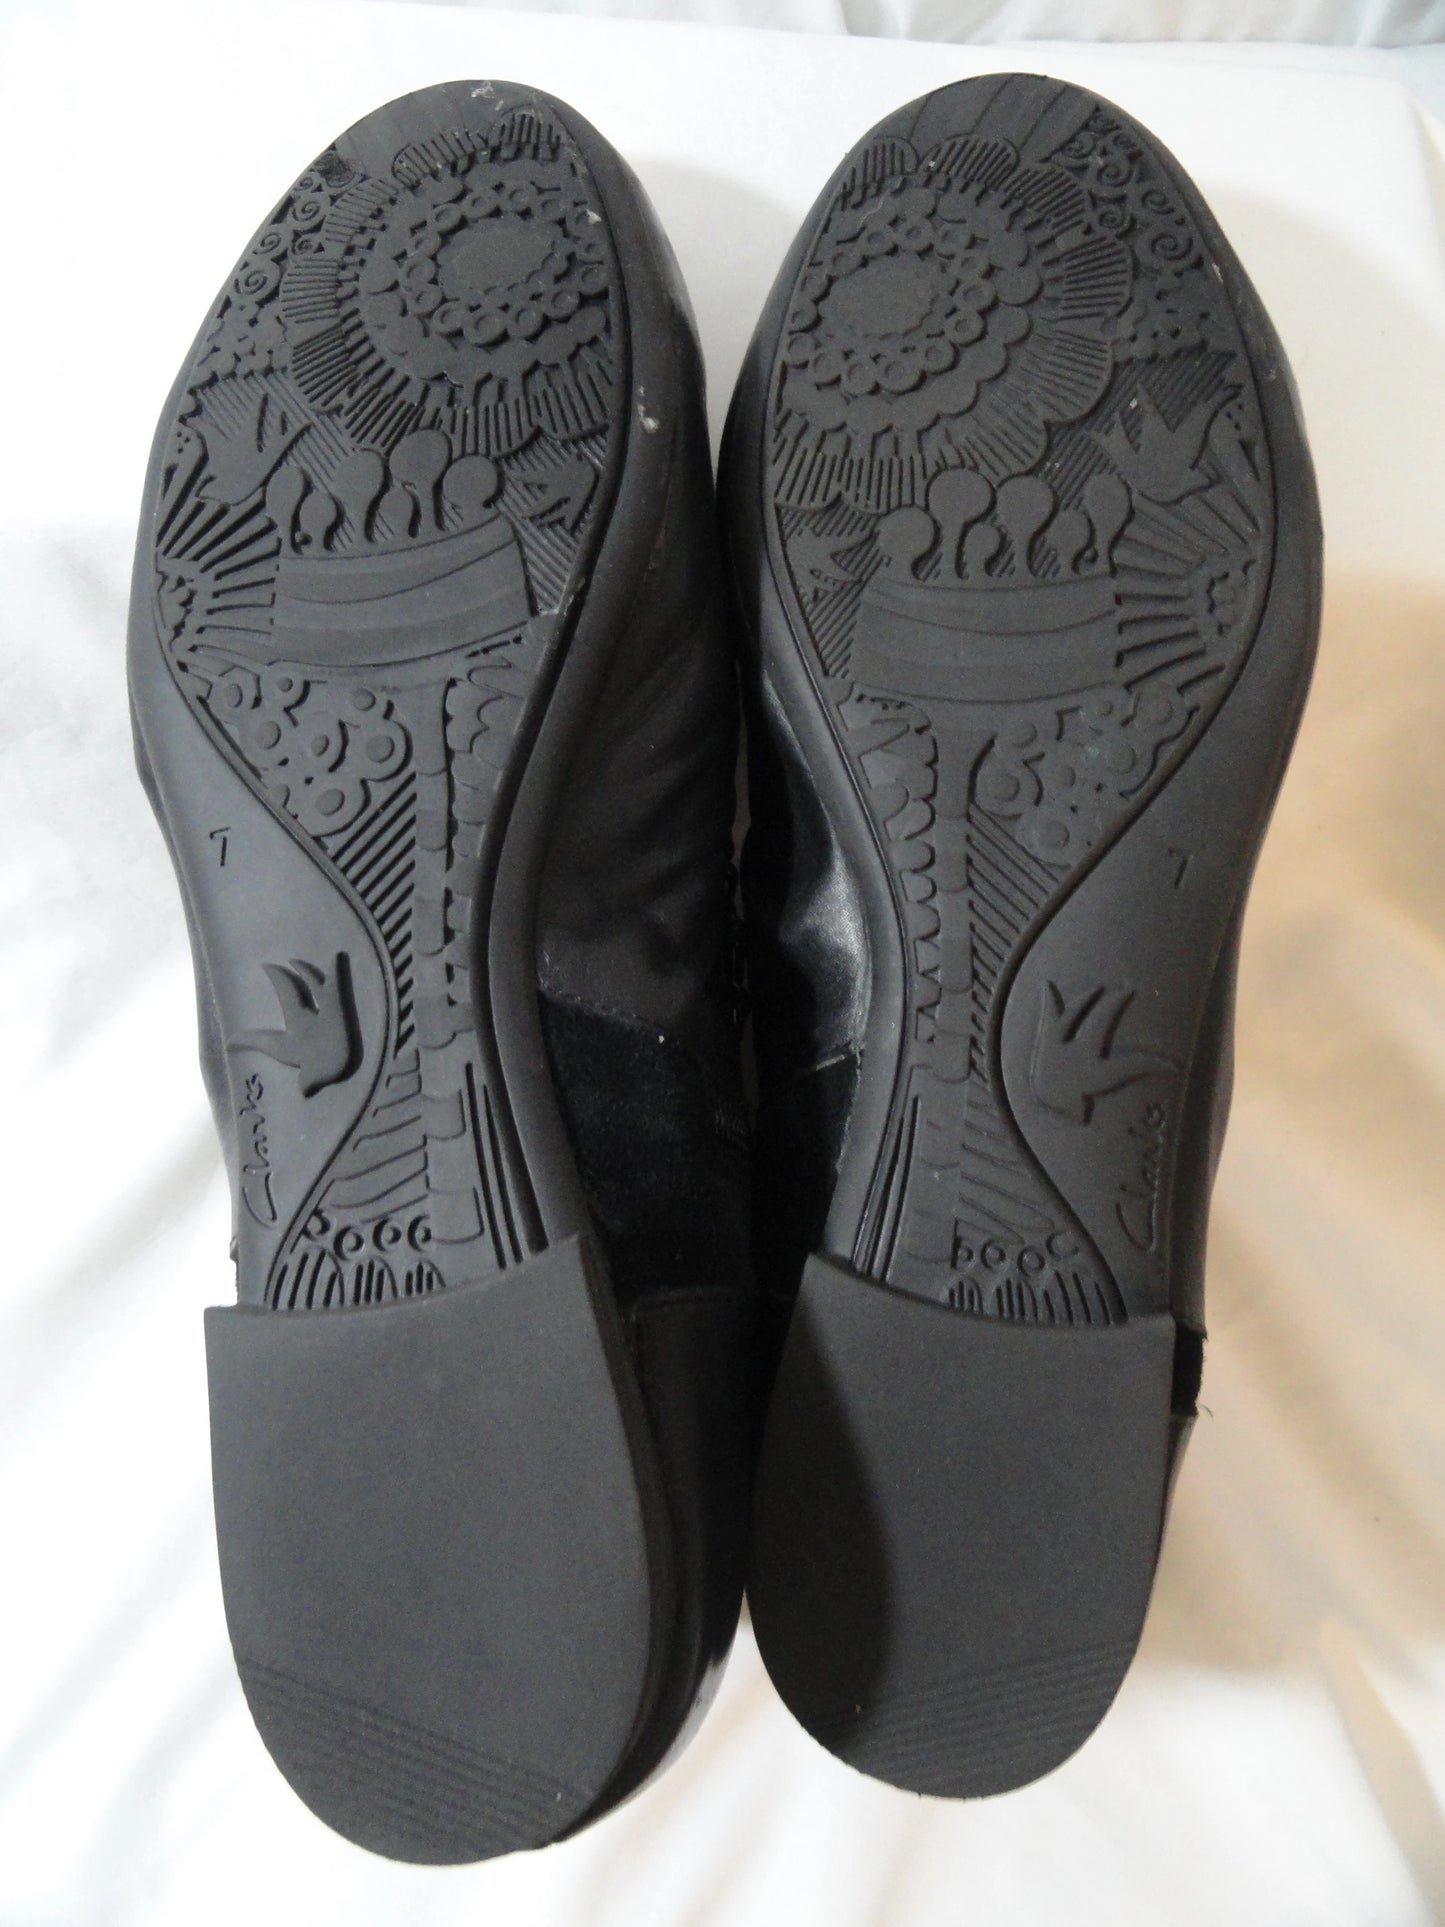 Load image into Gallery viewer, Clarks Black Booties Size 7R SKU 000098
